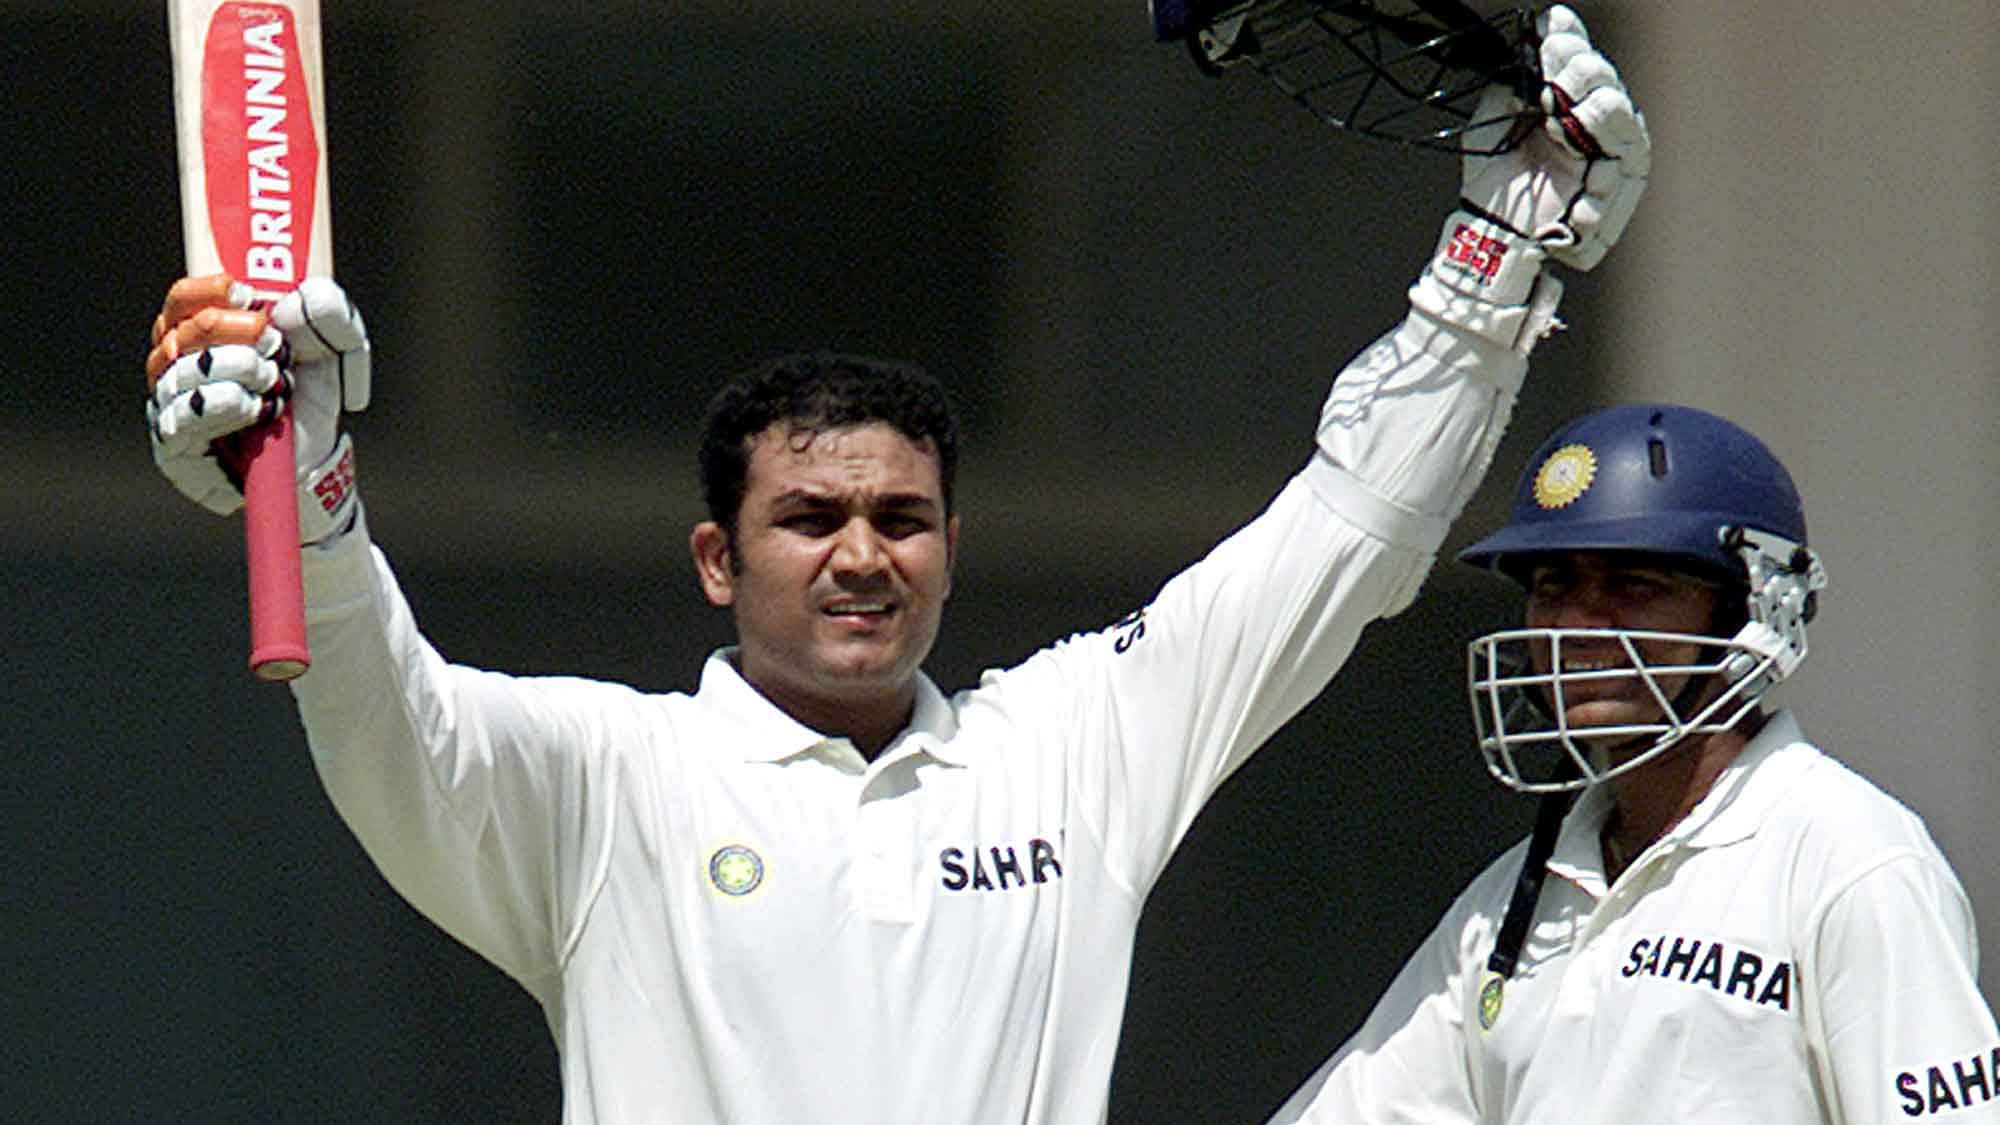  Virender Sehwag celebrates a century as Aakash Chopra watches on, during the Multan test against Pakistan on March 28, 2004. (Photo: Reuters)